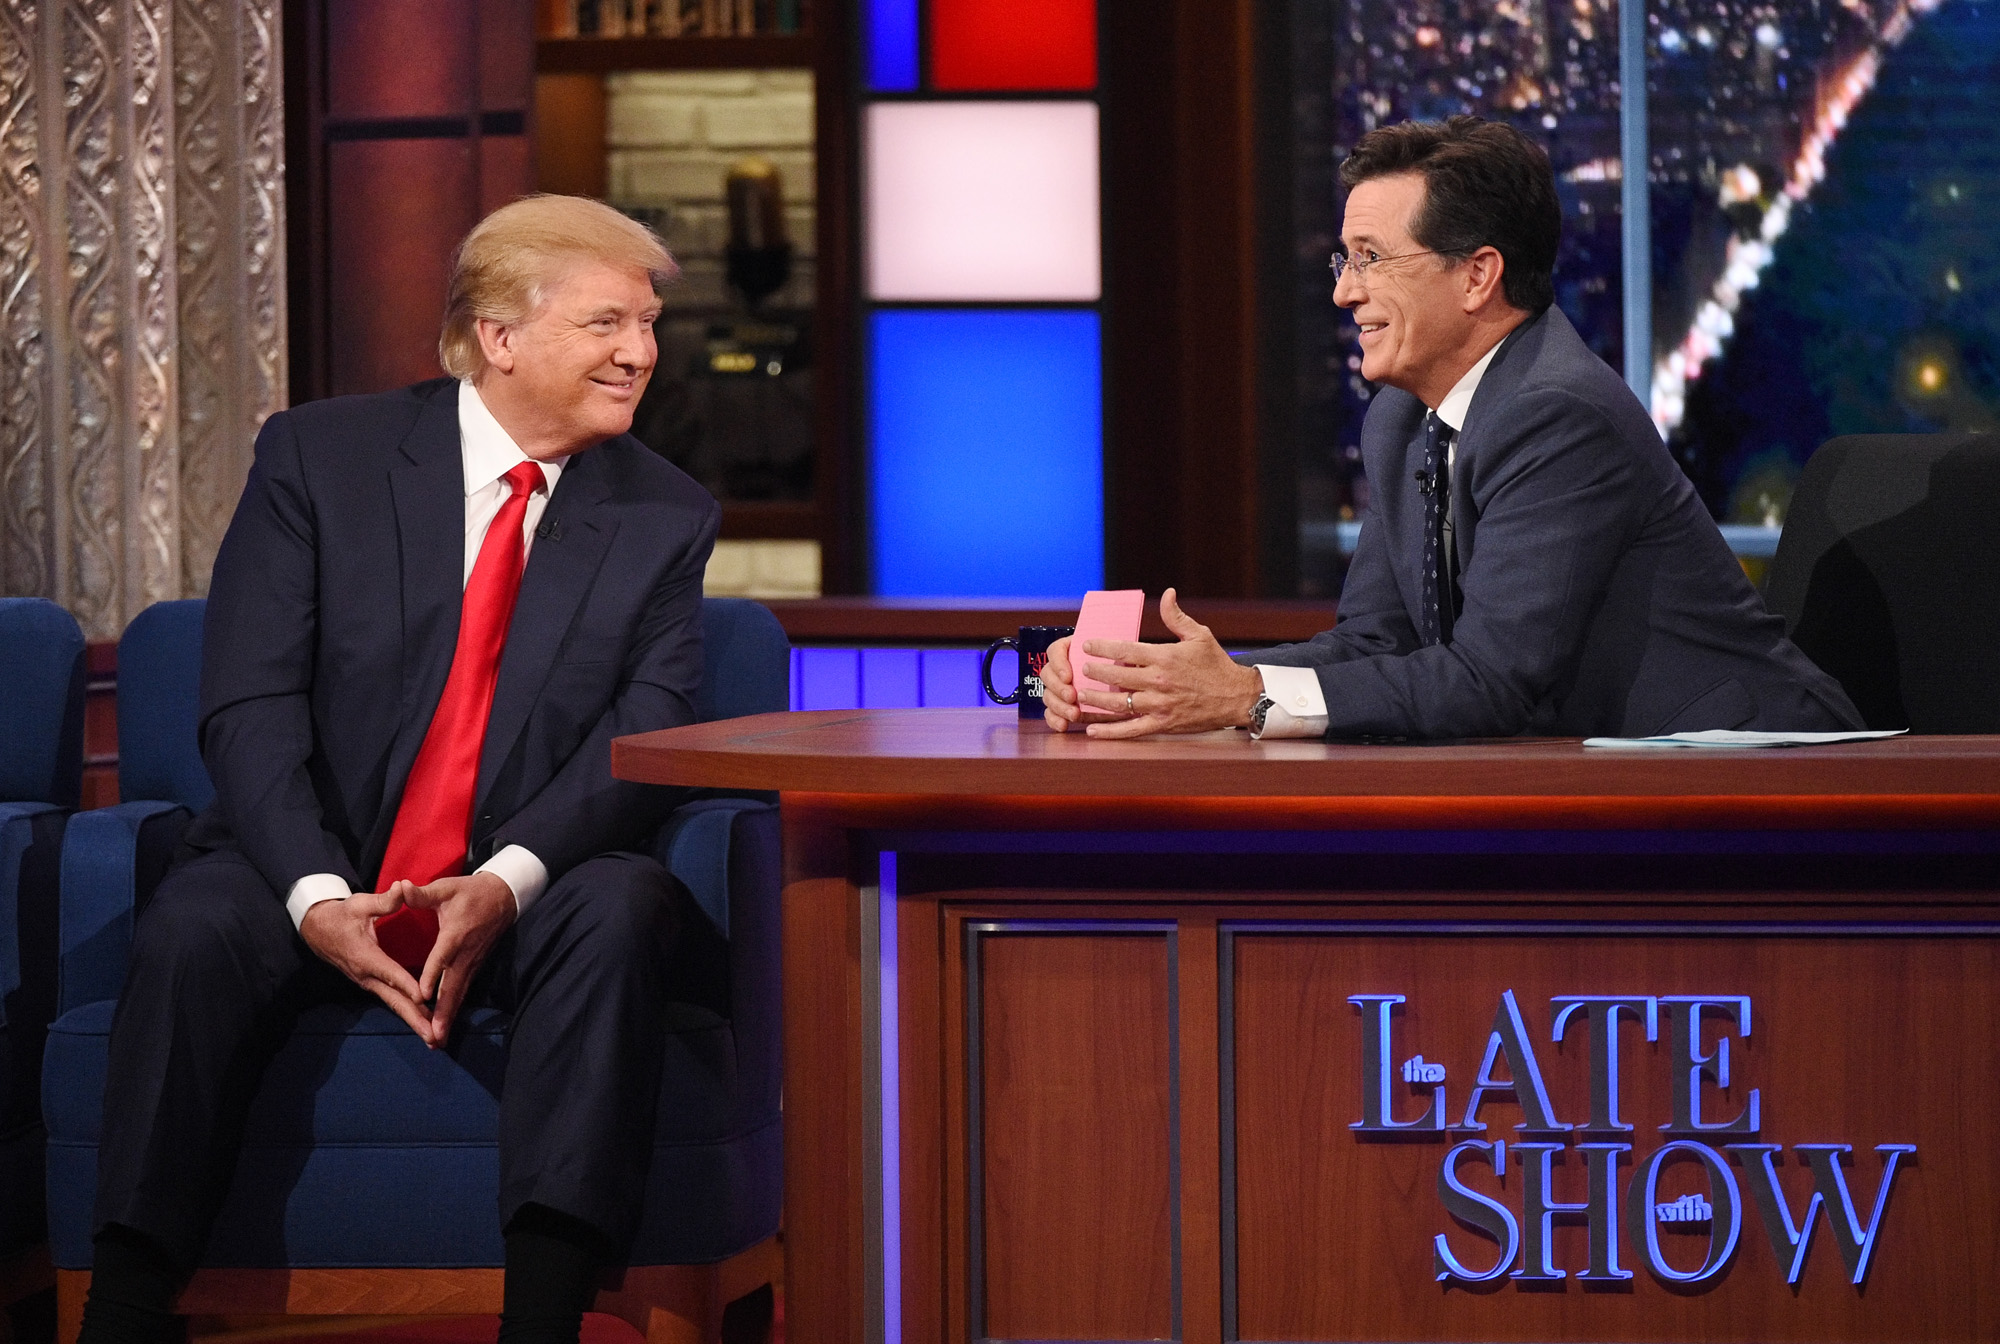 NEW YORK - SEPTEMBER 22: Donald Trump talks about his US Presidential campaign  on The Late Show with Stephen Colbert, Tuesday Sept. 22, 2015 on the CBS Television Network. (CBS Photo Archive&mdash;CBS via Getty Images)